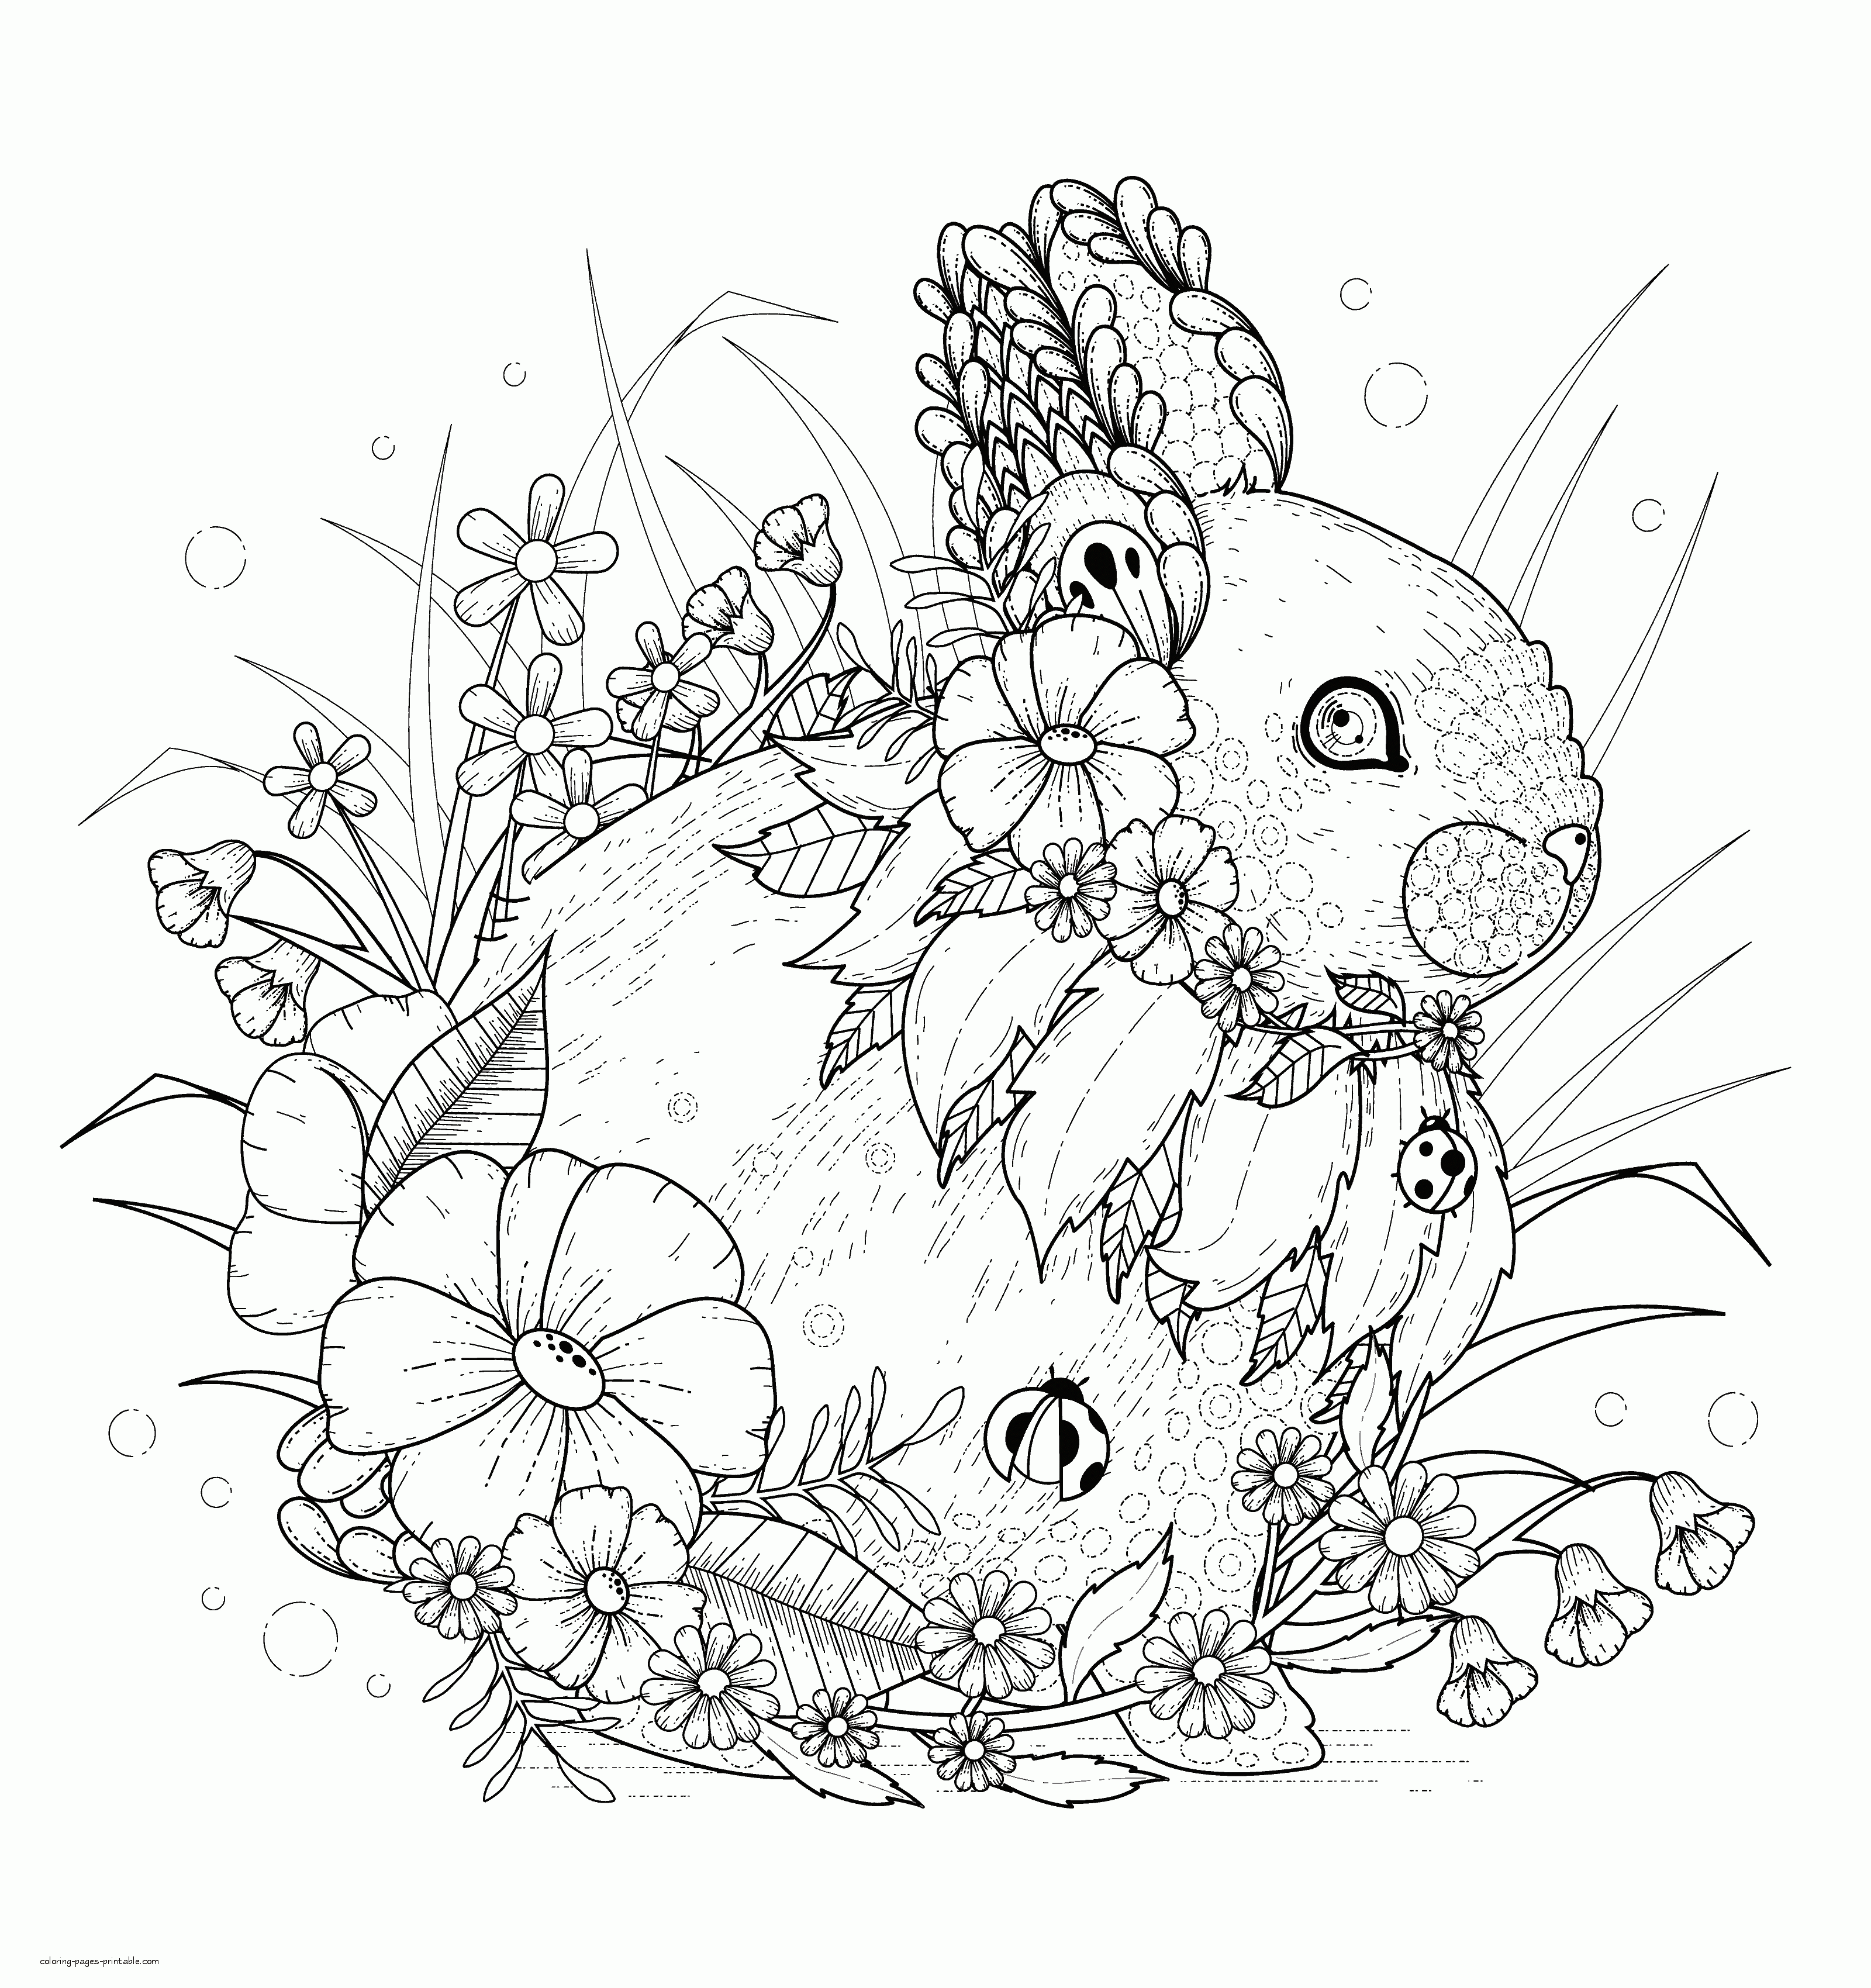 Rabbit Coloring Pages. Adult Animal Colouring Book